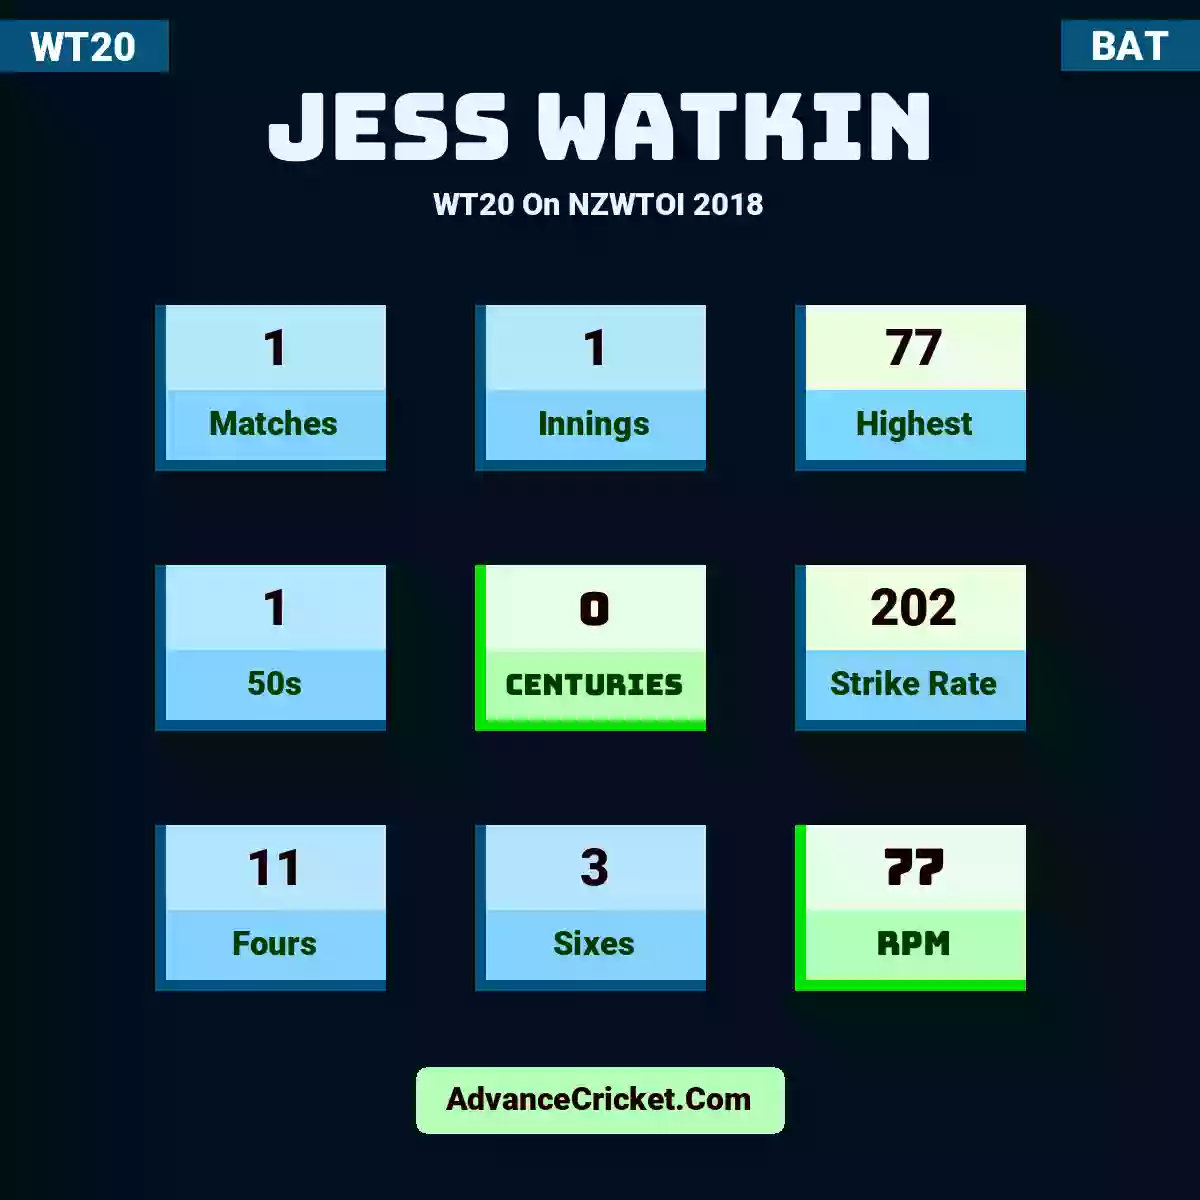 Jess Watkin WT20  On NZWTOI 2018, Jess Watkin played 1 matches, scored 77 runs as highest, 1 half-centuries, and 0 centuries, with a strike rate of 202. J.Watkin hit 11 fours and 3 sixes, with an RPM of 77.